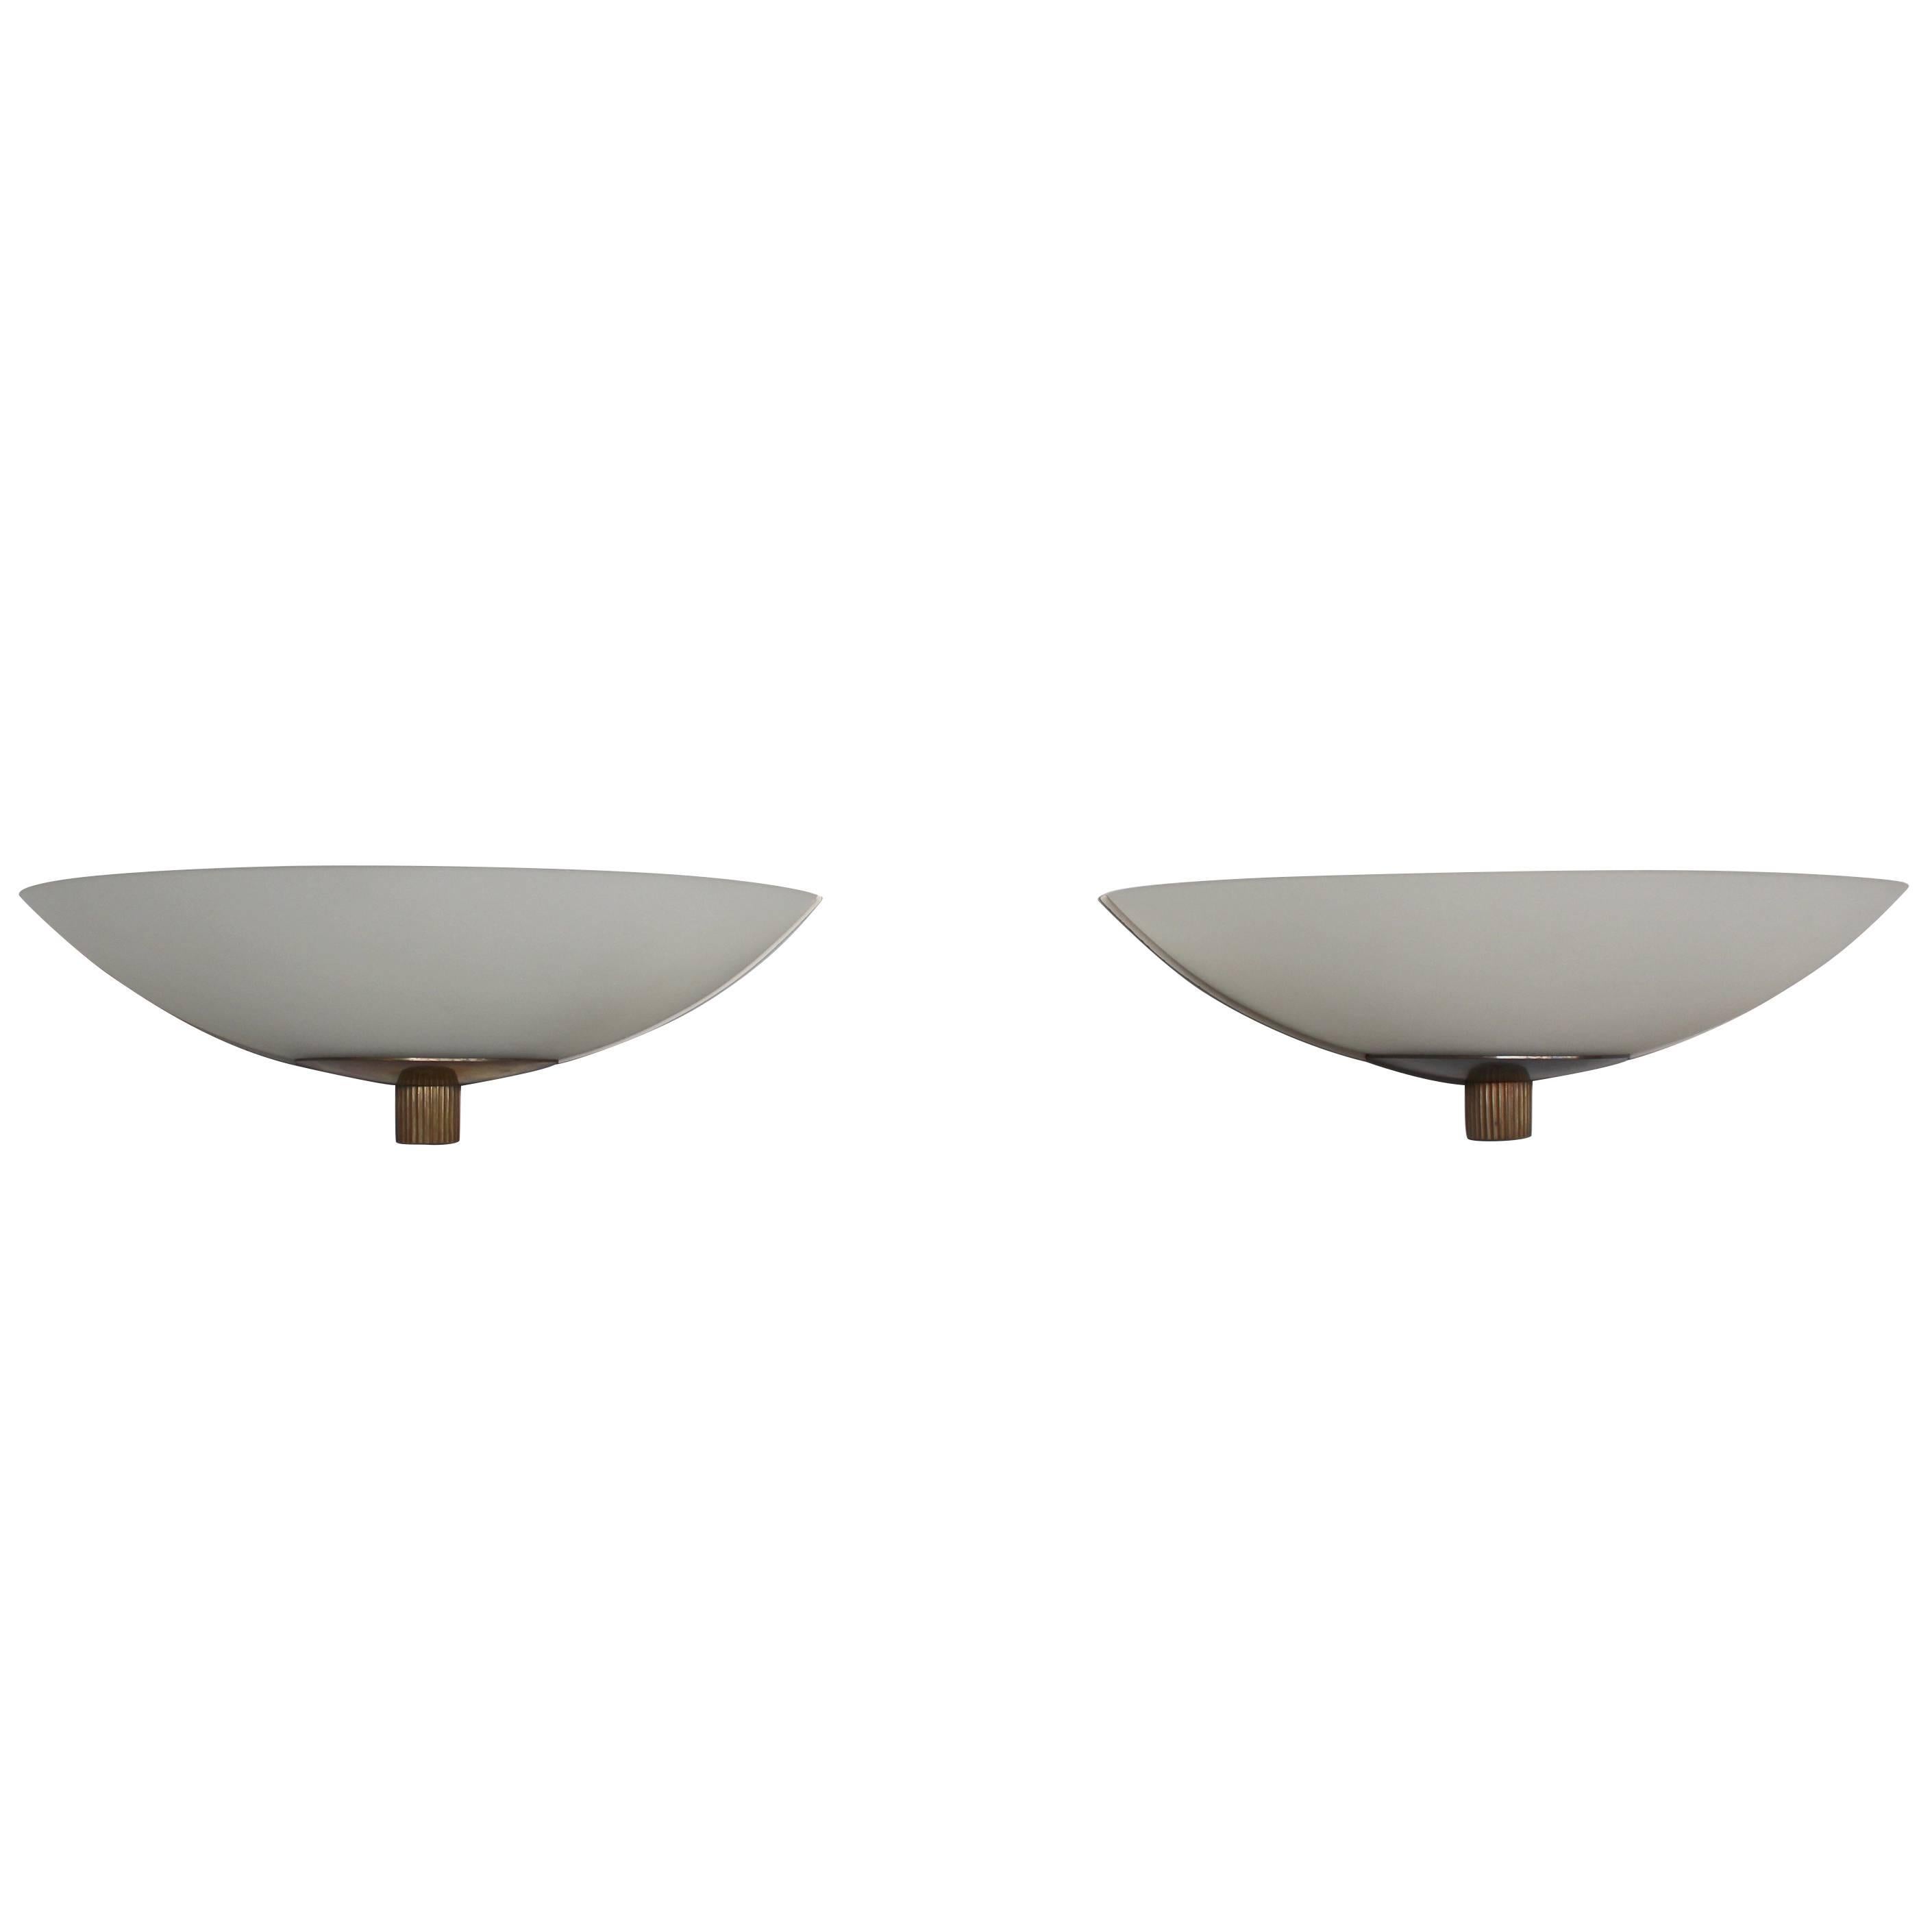 A Pair of Fine French Art Deco Frosted Glass and Bronze Sconces